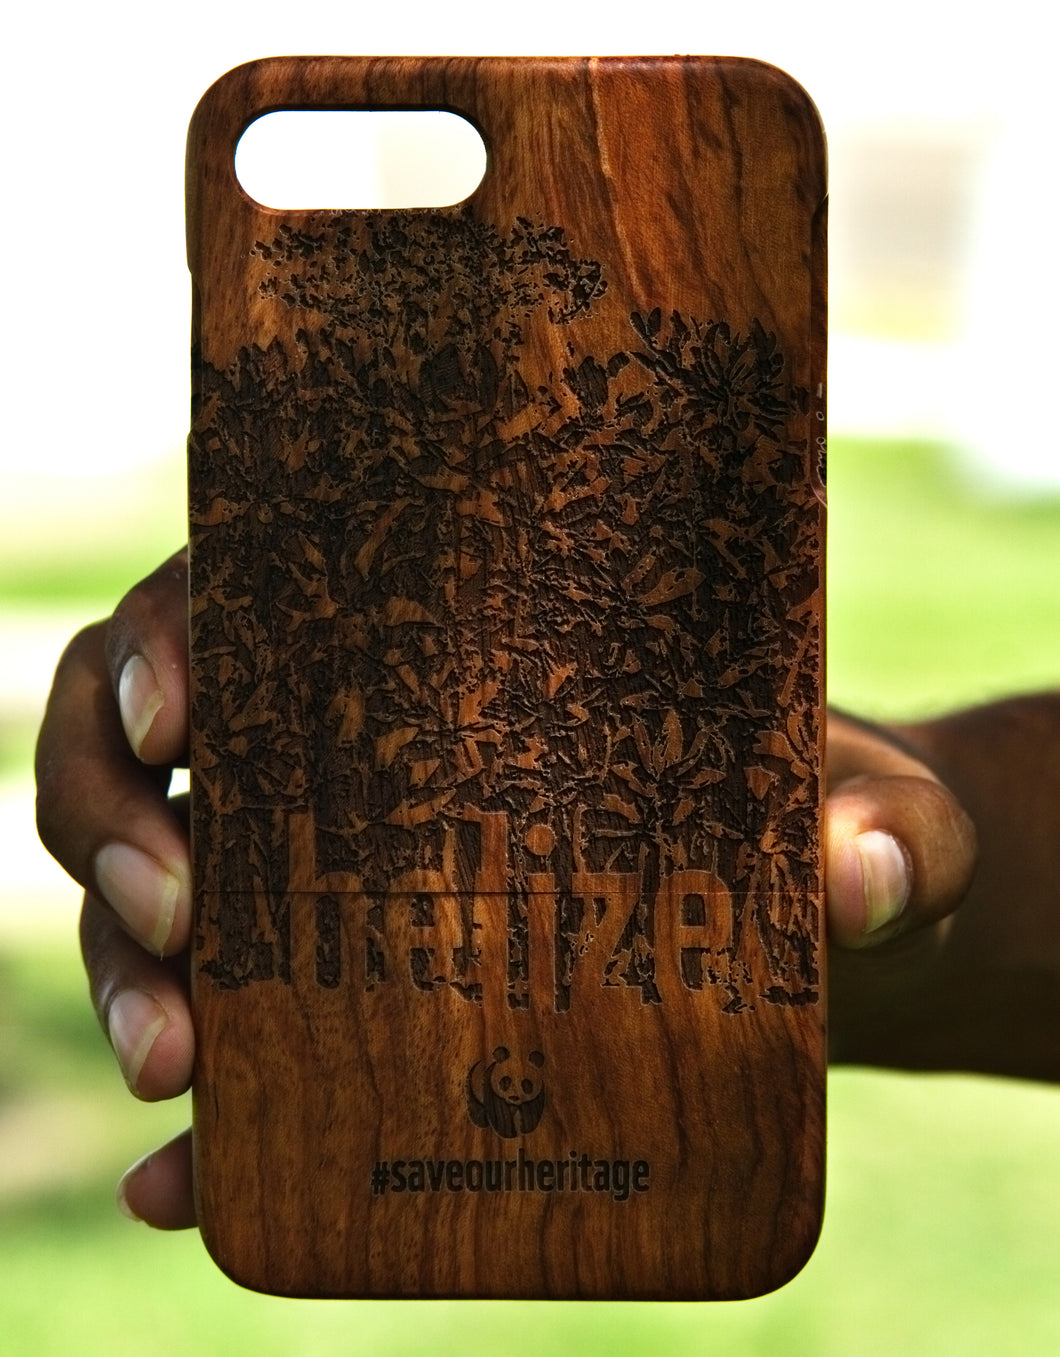 IPhone 7+/8+ (WWF Belize Saving our Shared Heritage design) - A&S Covers